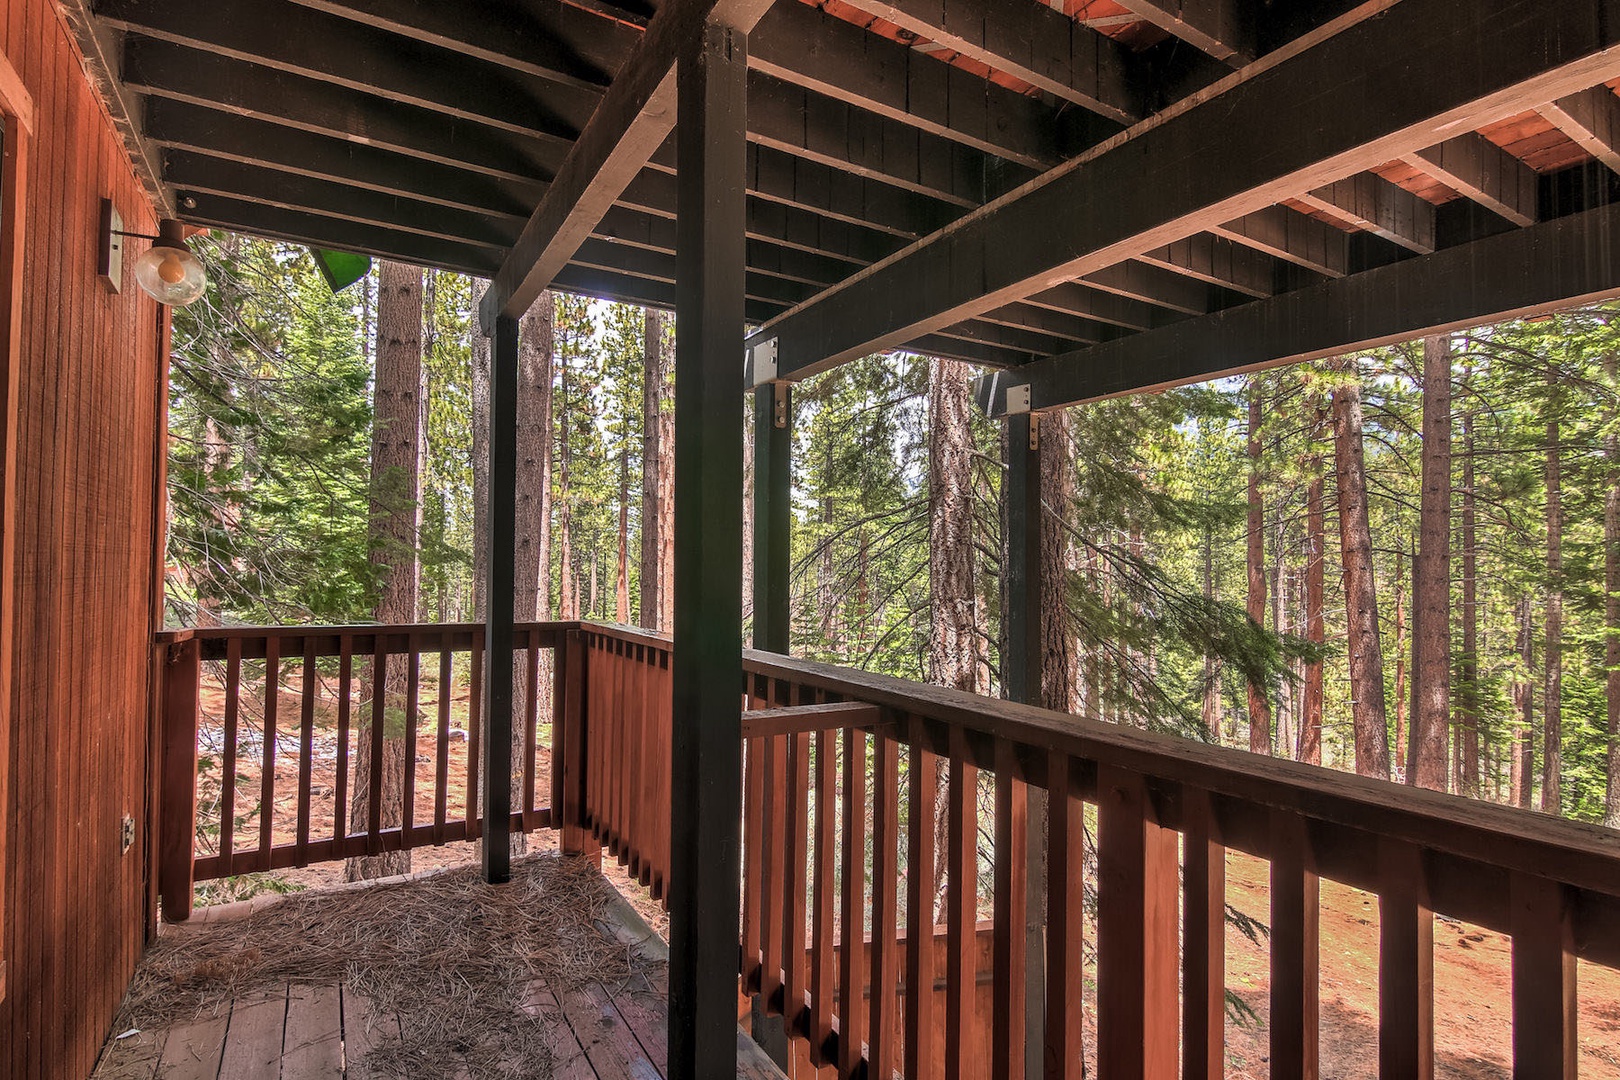 Downstairs patio overlooking forest